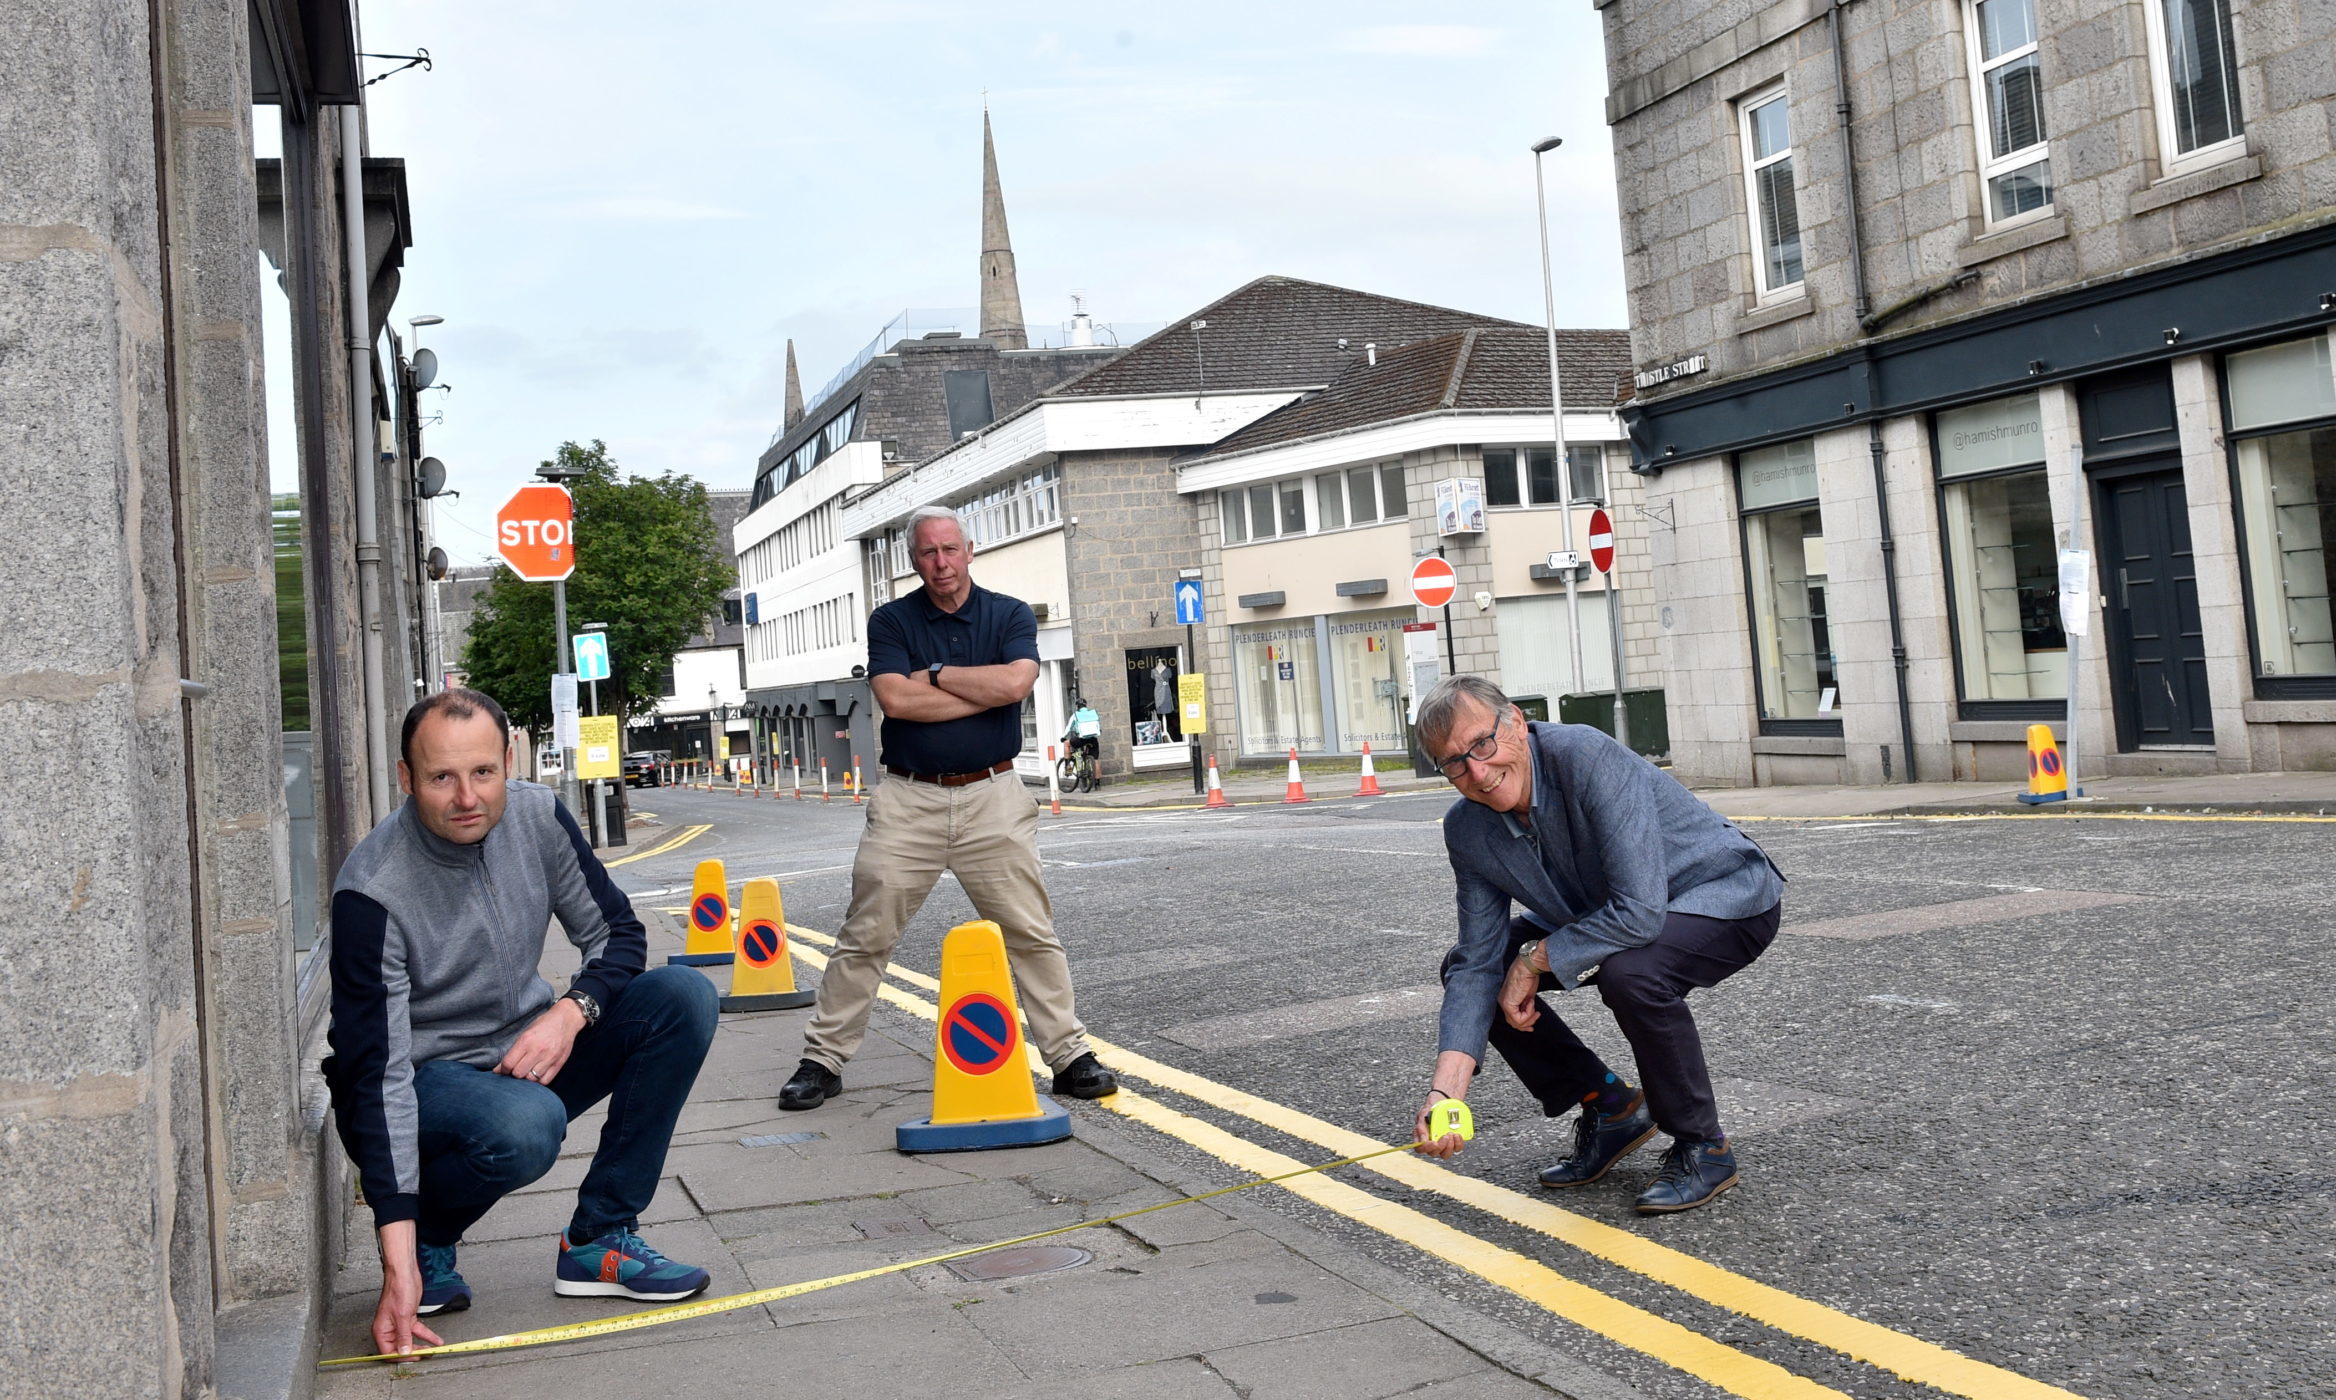 Mark (left) and Norman Esslemont (right) of Esslemonts measure the width of the pavement in Thistle Street, as Rob Goldie of Baskin-Robbins looks on.
Picture by DARRELL BENNS